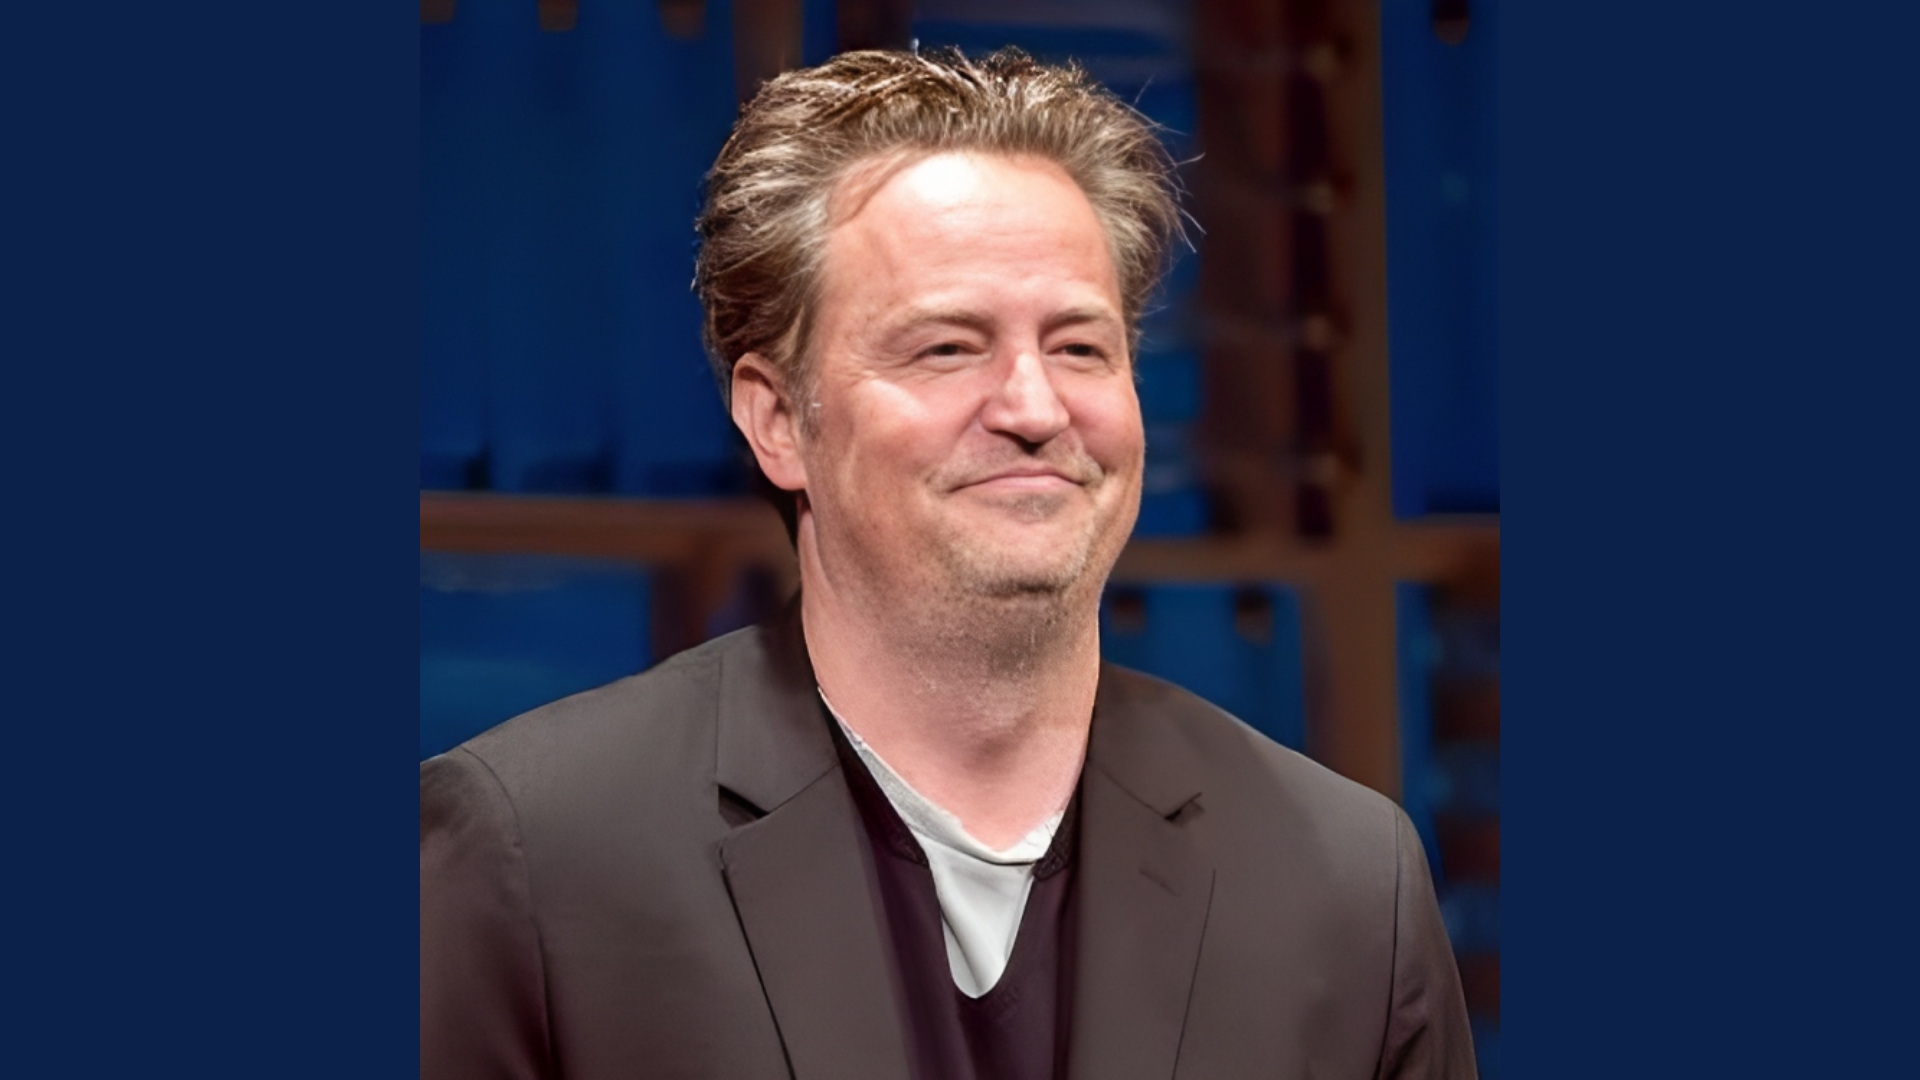 Matthew Perry: Behind the scenes of stardom and struggles